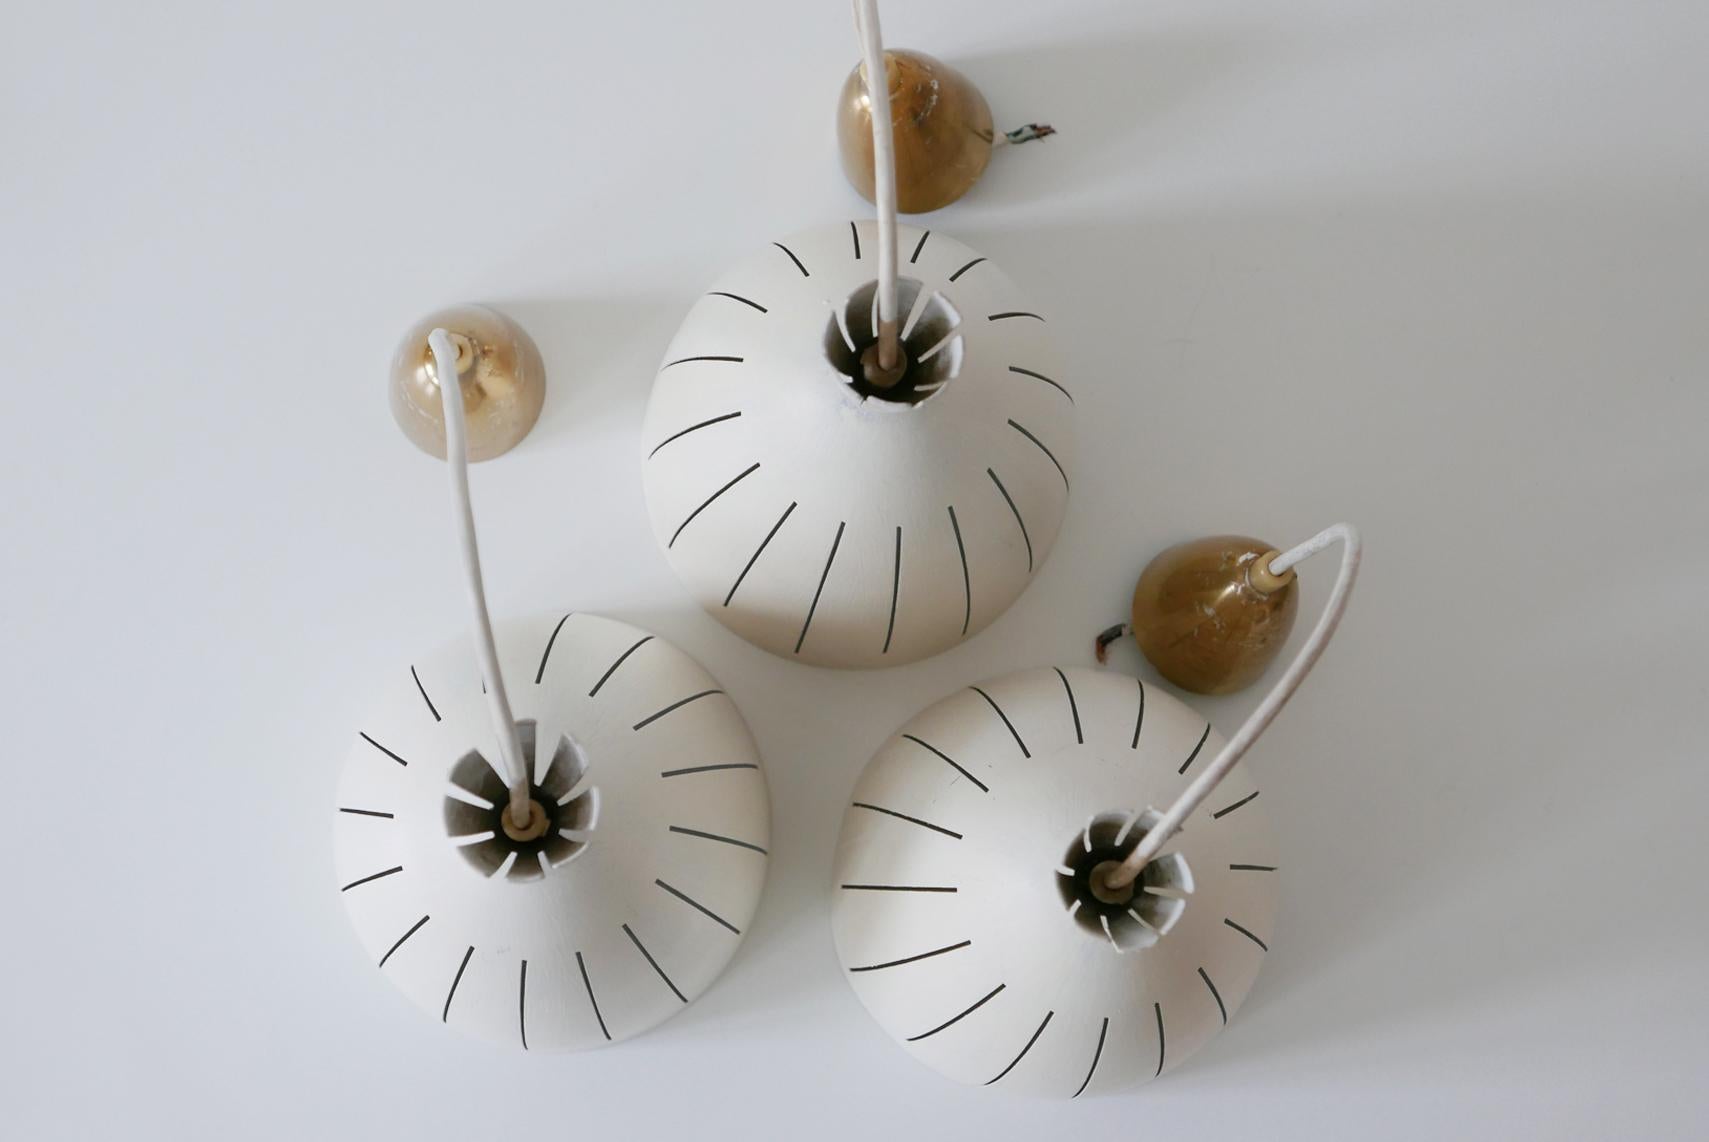 Set of Three Lovely Mid-Century Modern Diabolo Pendant Lamps, 1950s, Germany For Sale 13